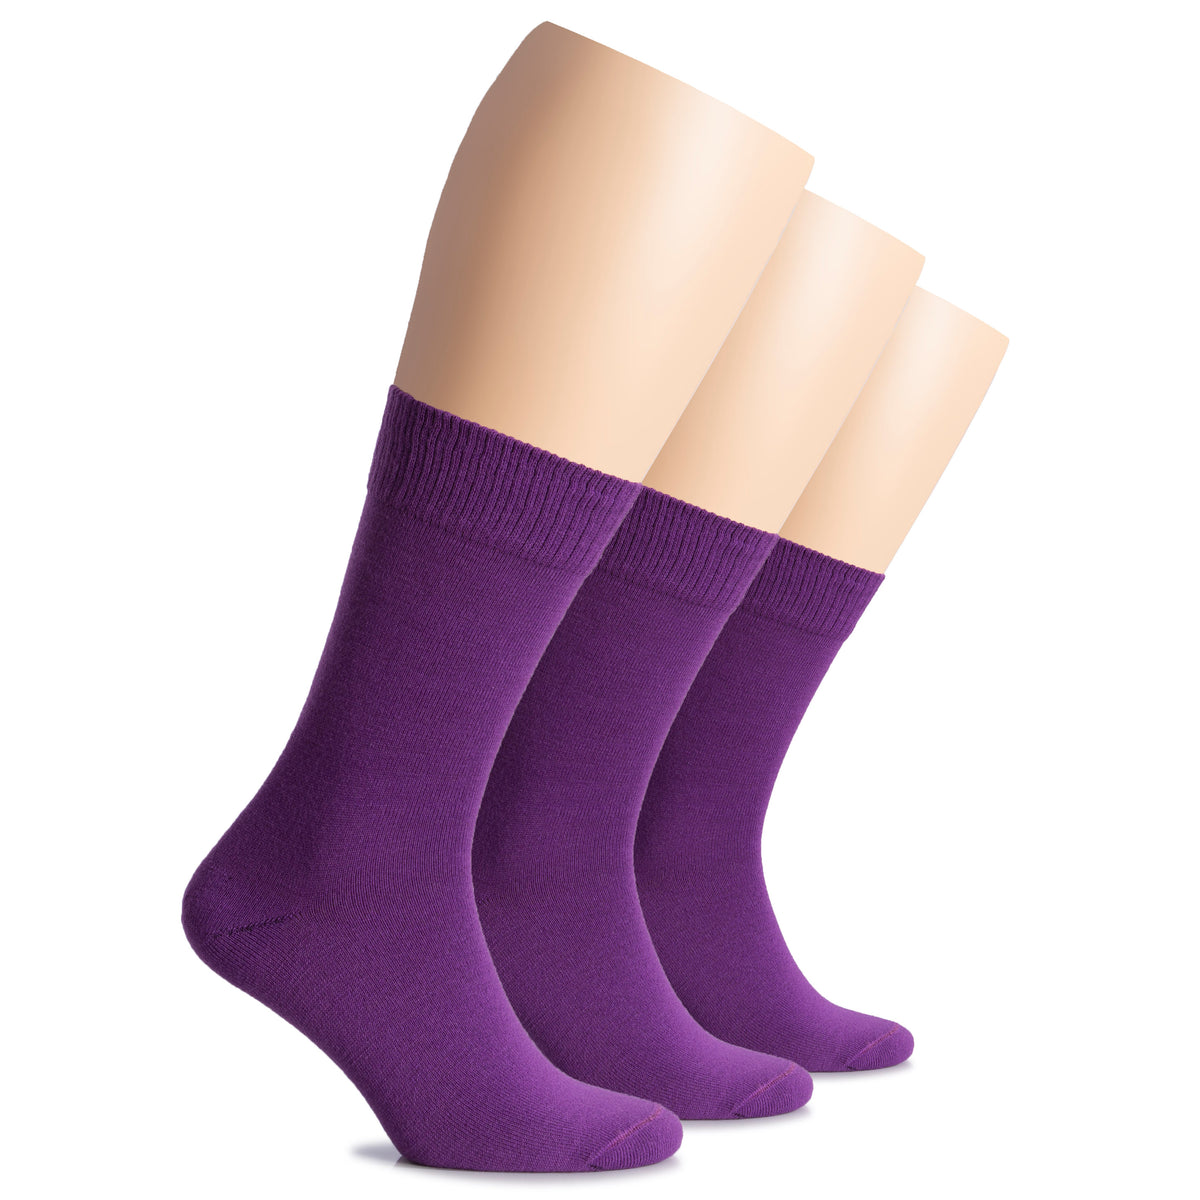 Three women's crew socks made of wool, colored in shades of purple, displayed on a plain white surface.